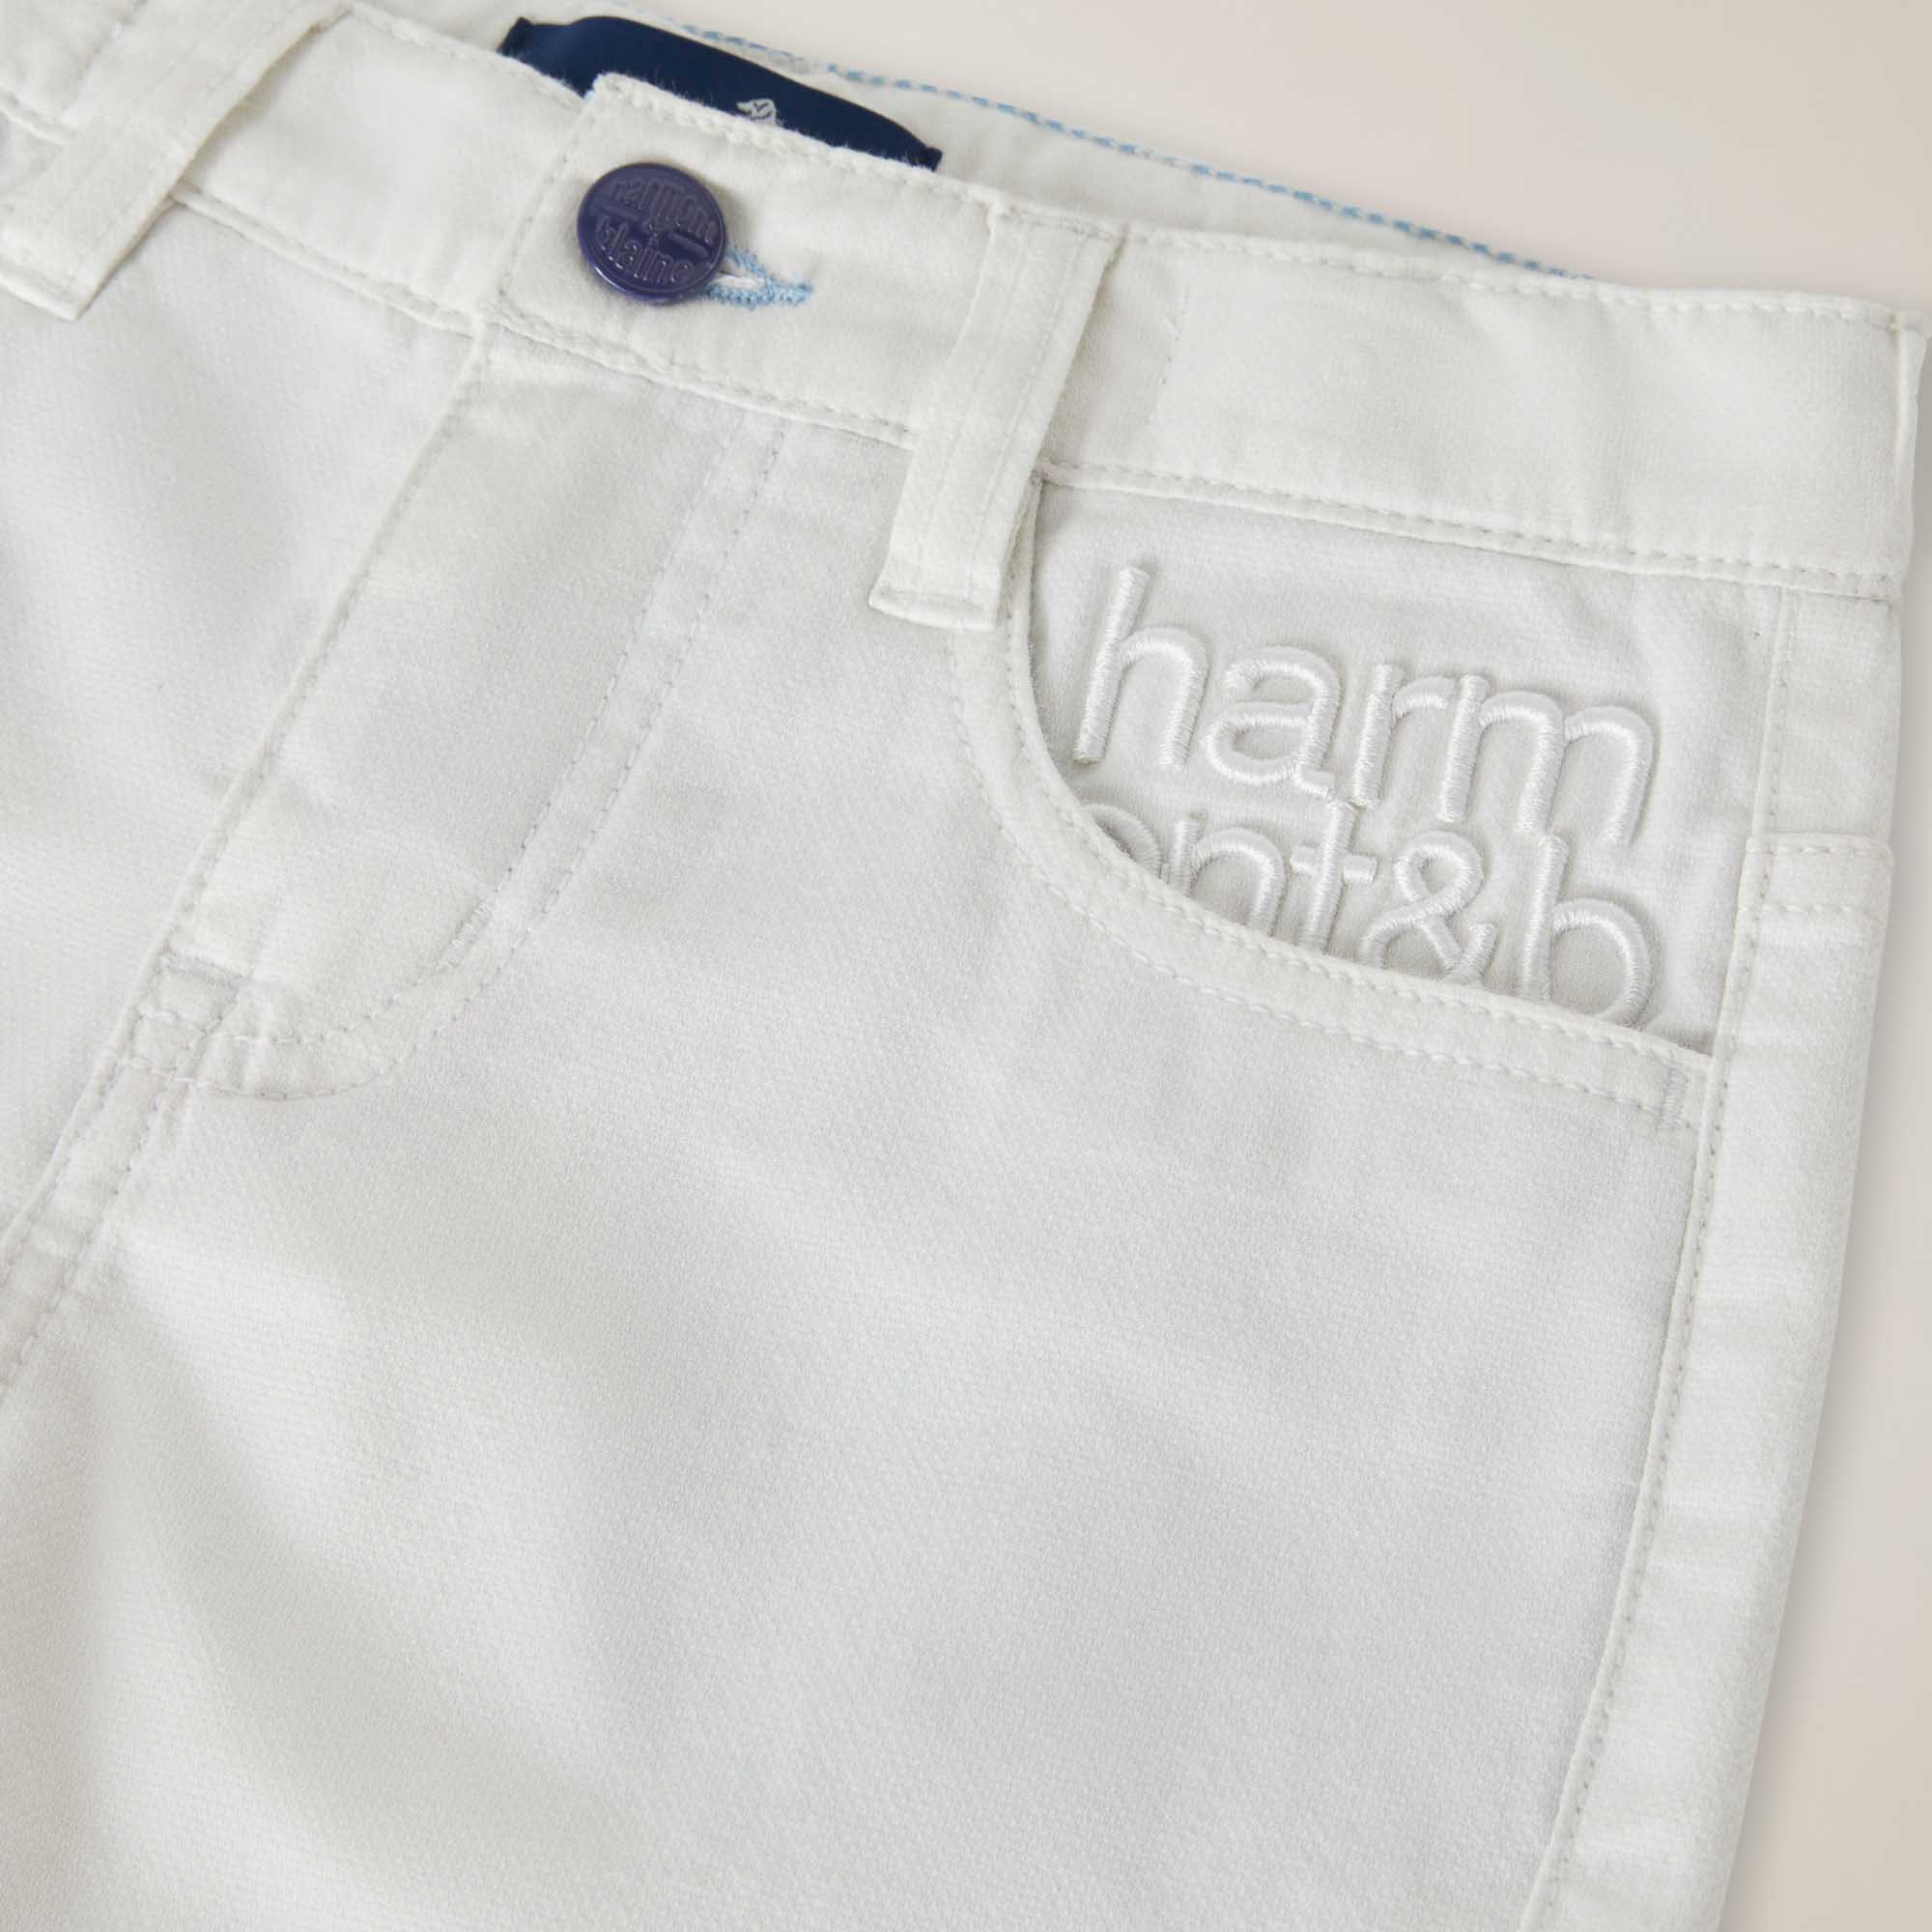 Bermuda shorts with slash pockets and Oxford weave, White, large image number 2